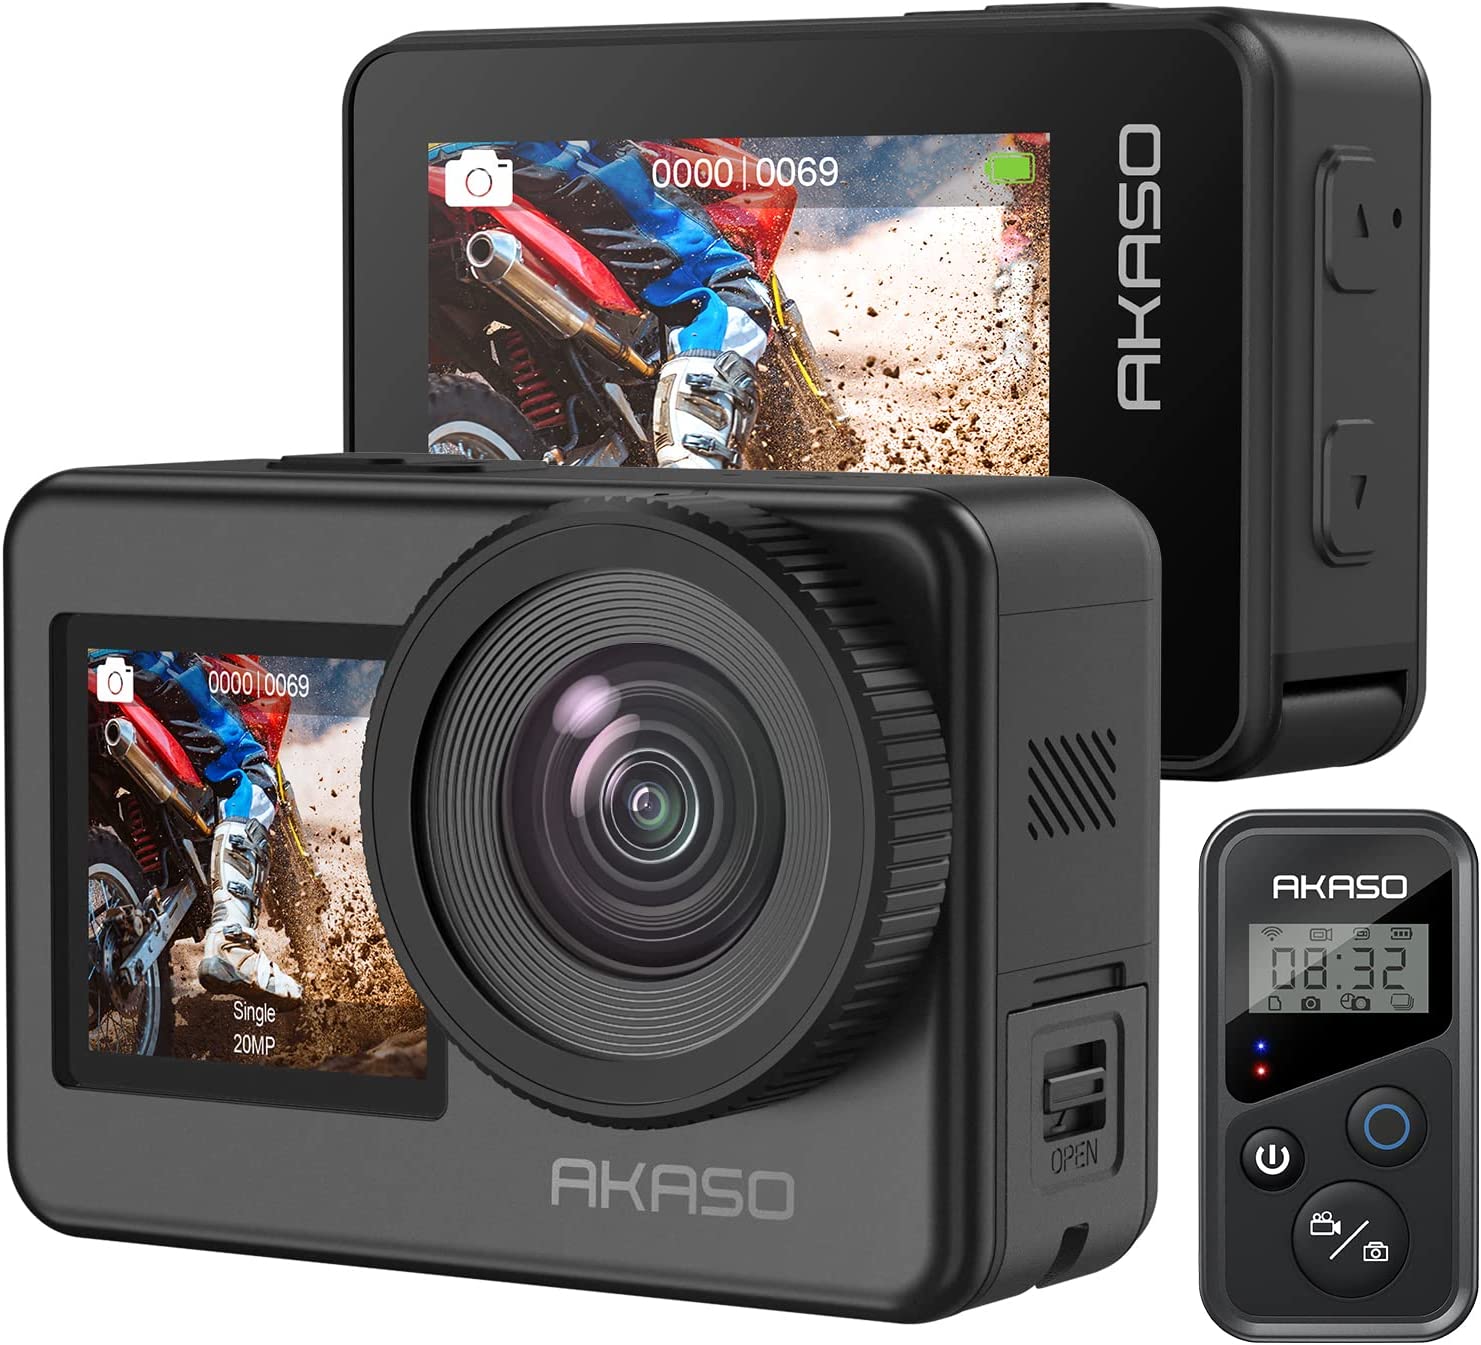 AKASO Brave 7 LE 4K30FPS 20MP WiFi Action Camera 4K Touch Screen